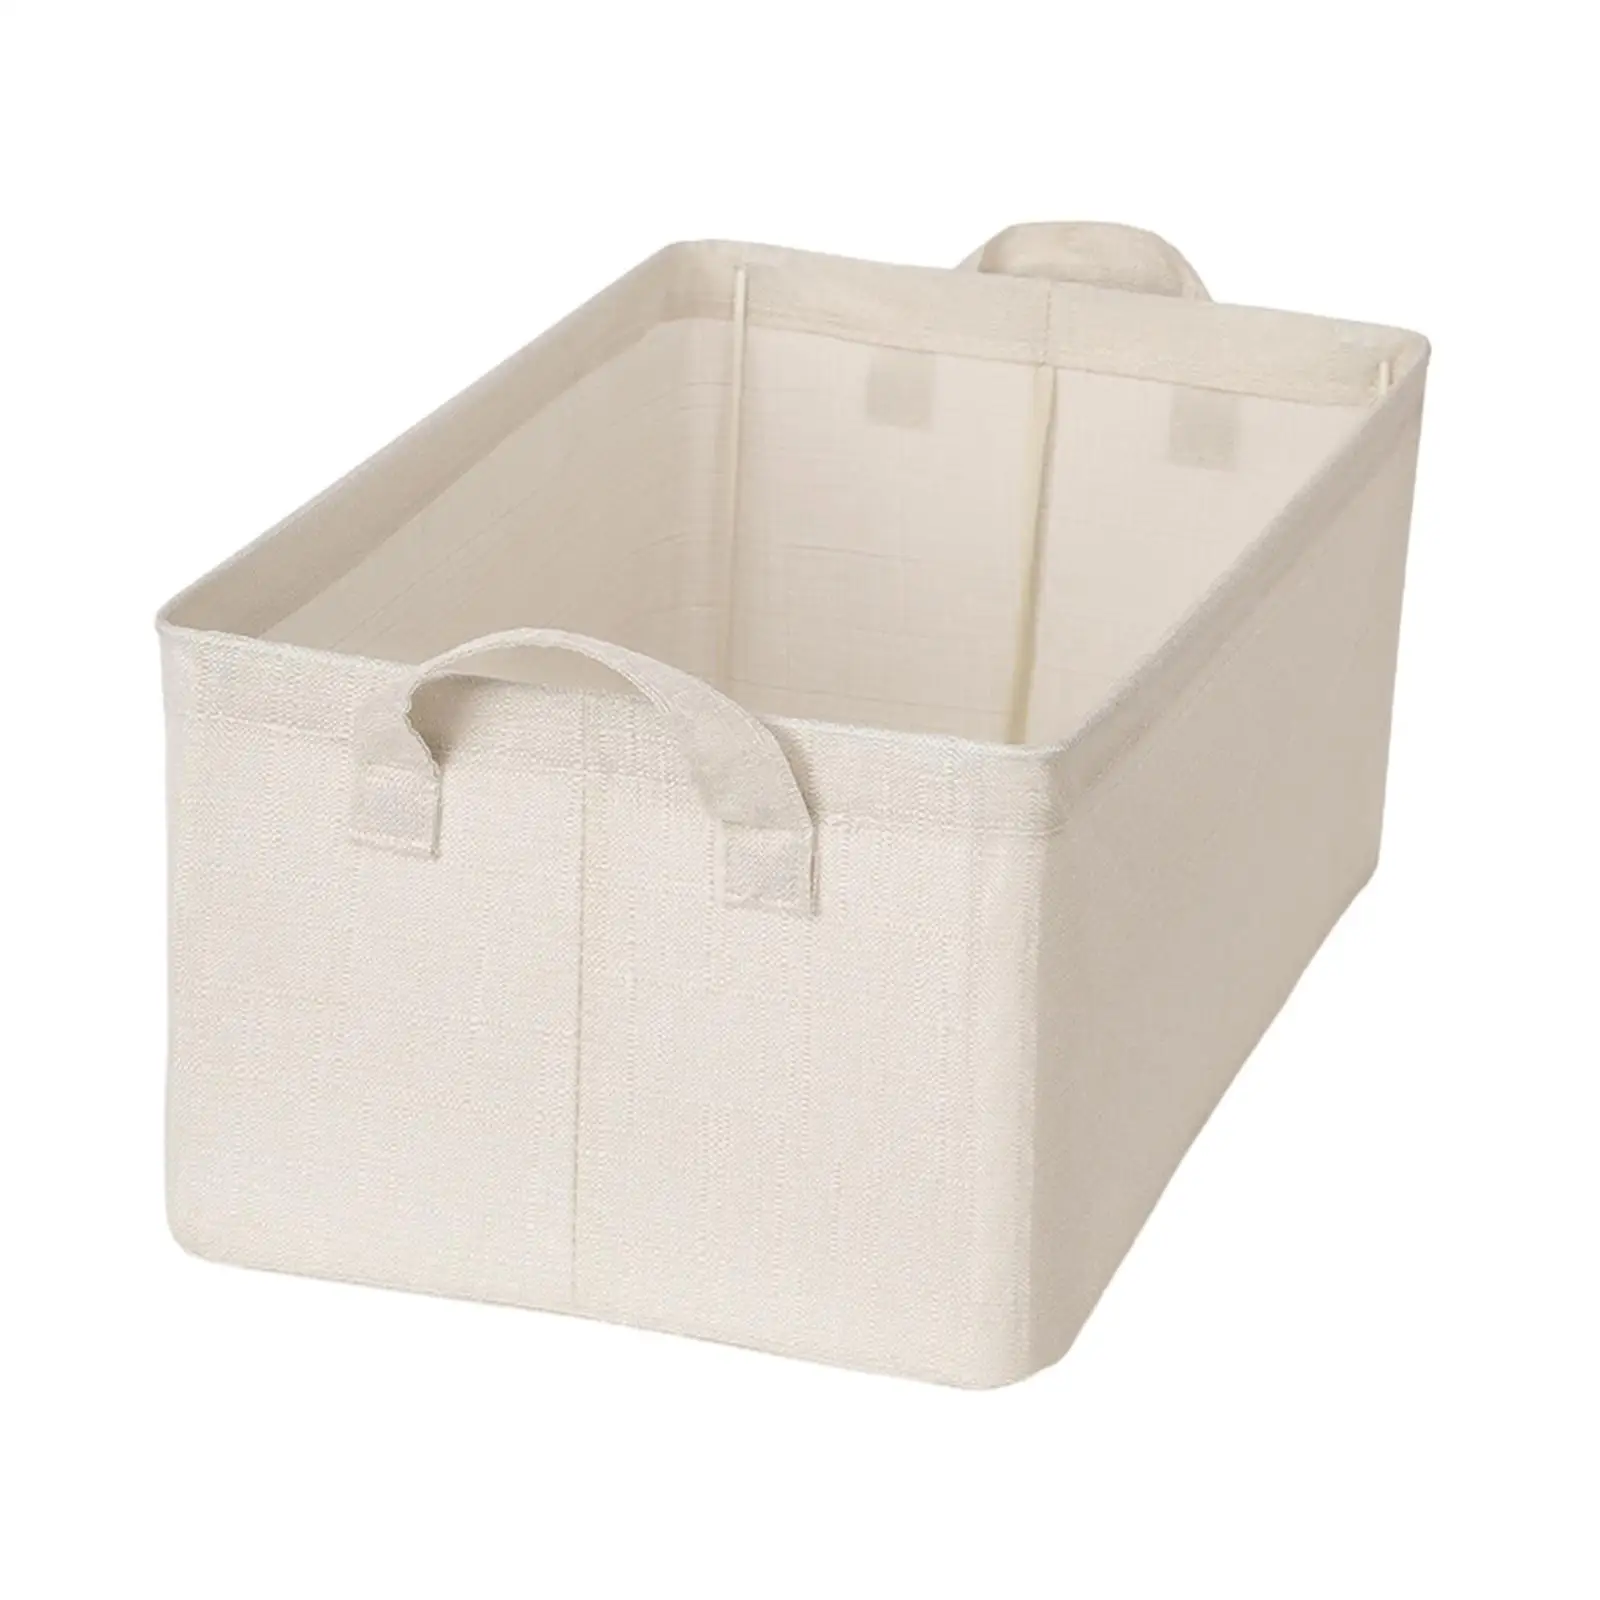 Storage Basket Sundries Organizer Storage Container Portable Storage Bins for Blanket Dirty Clothes Socks Bed Sheets Dorms